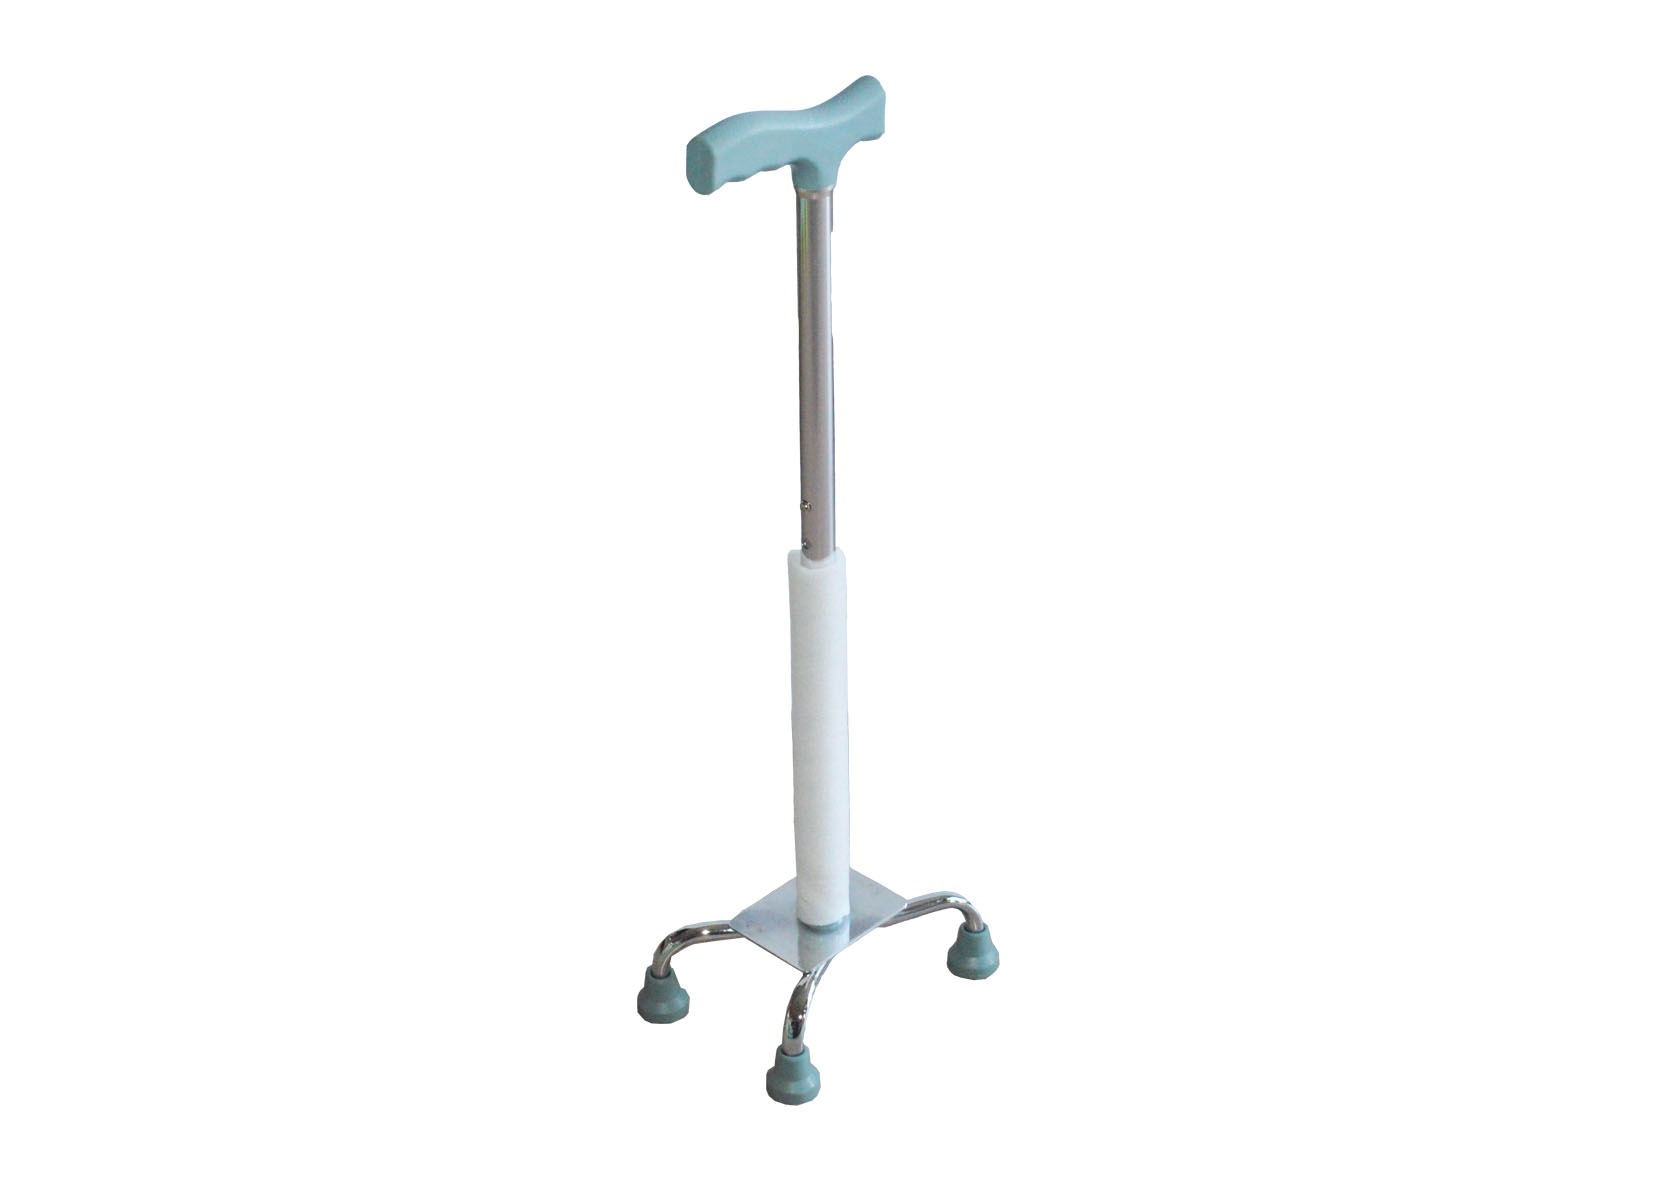 NHG Pharmacy Online-Walking sticks, canes and crutches